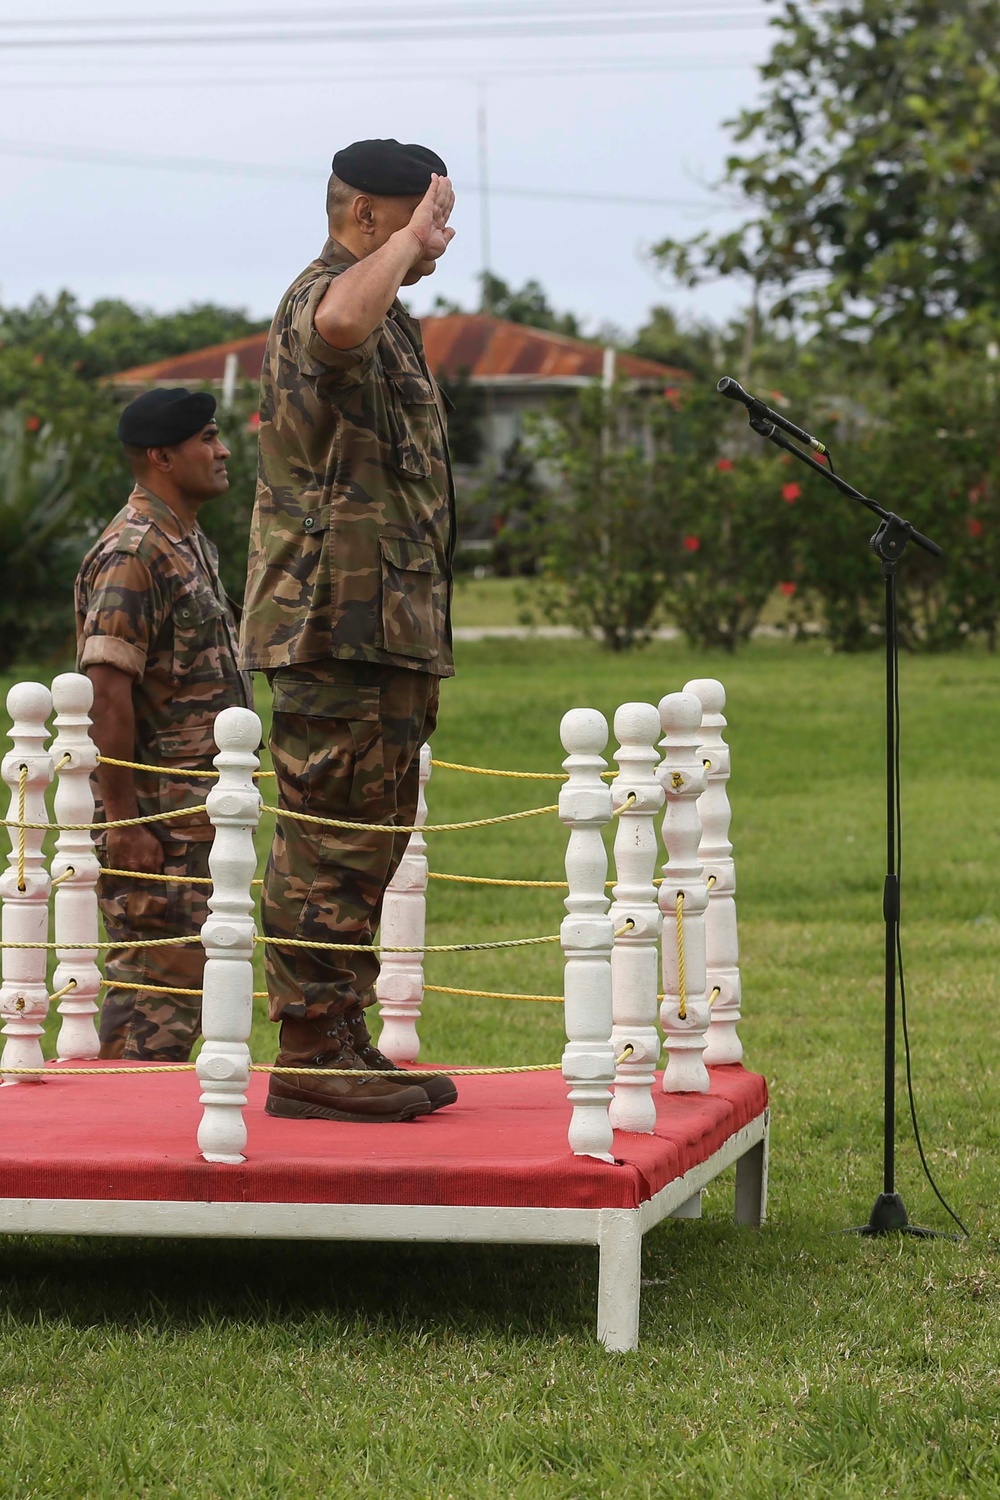 U.S. Marines attend ‘Welcome to Tonga’ ceremony for Exercise Tafakula 15